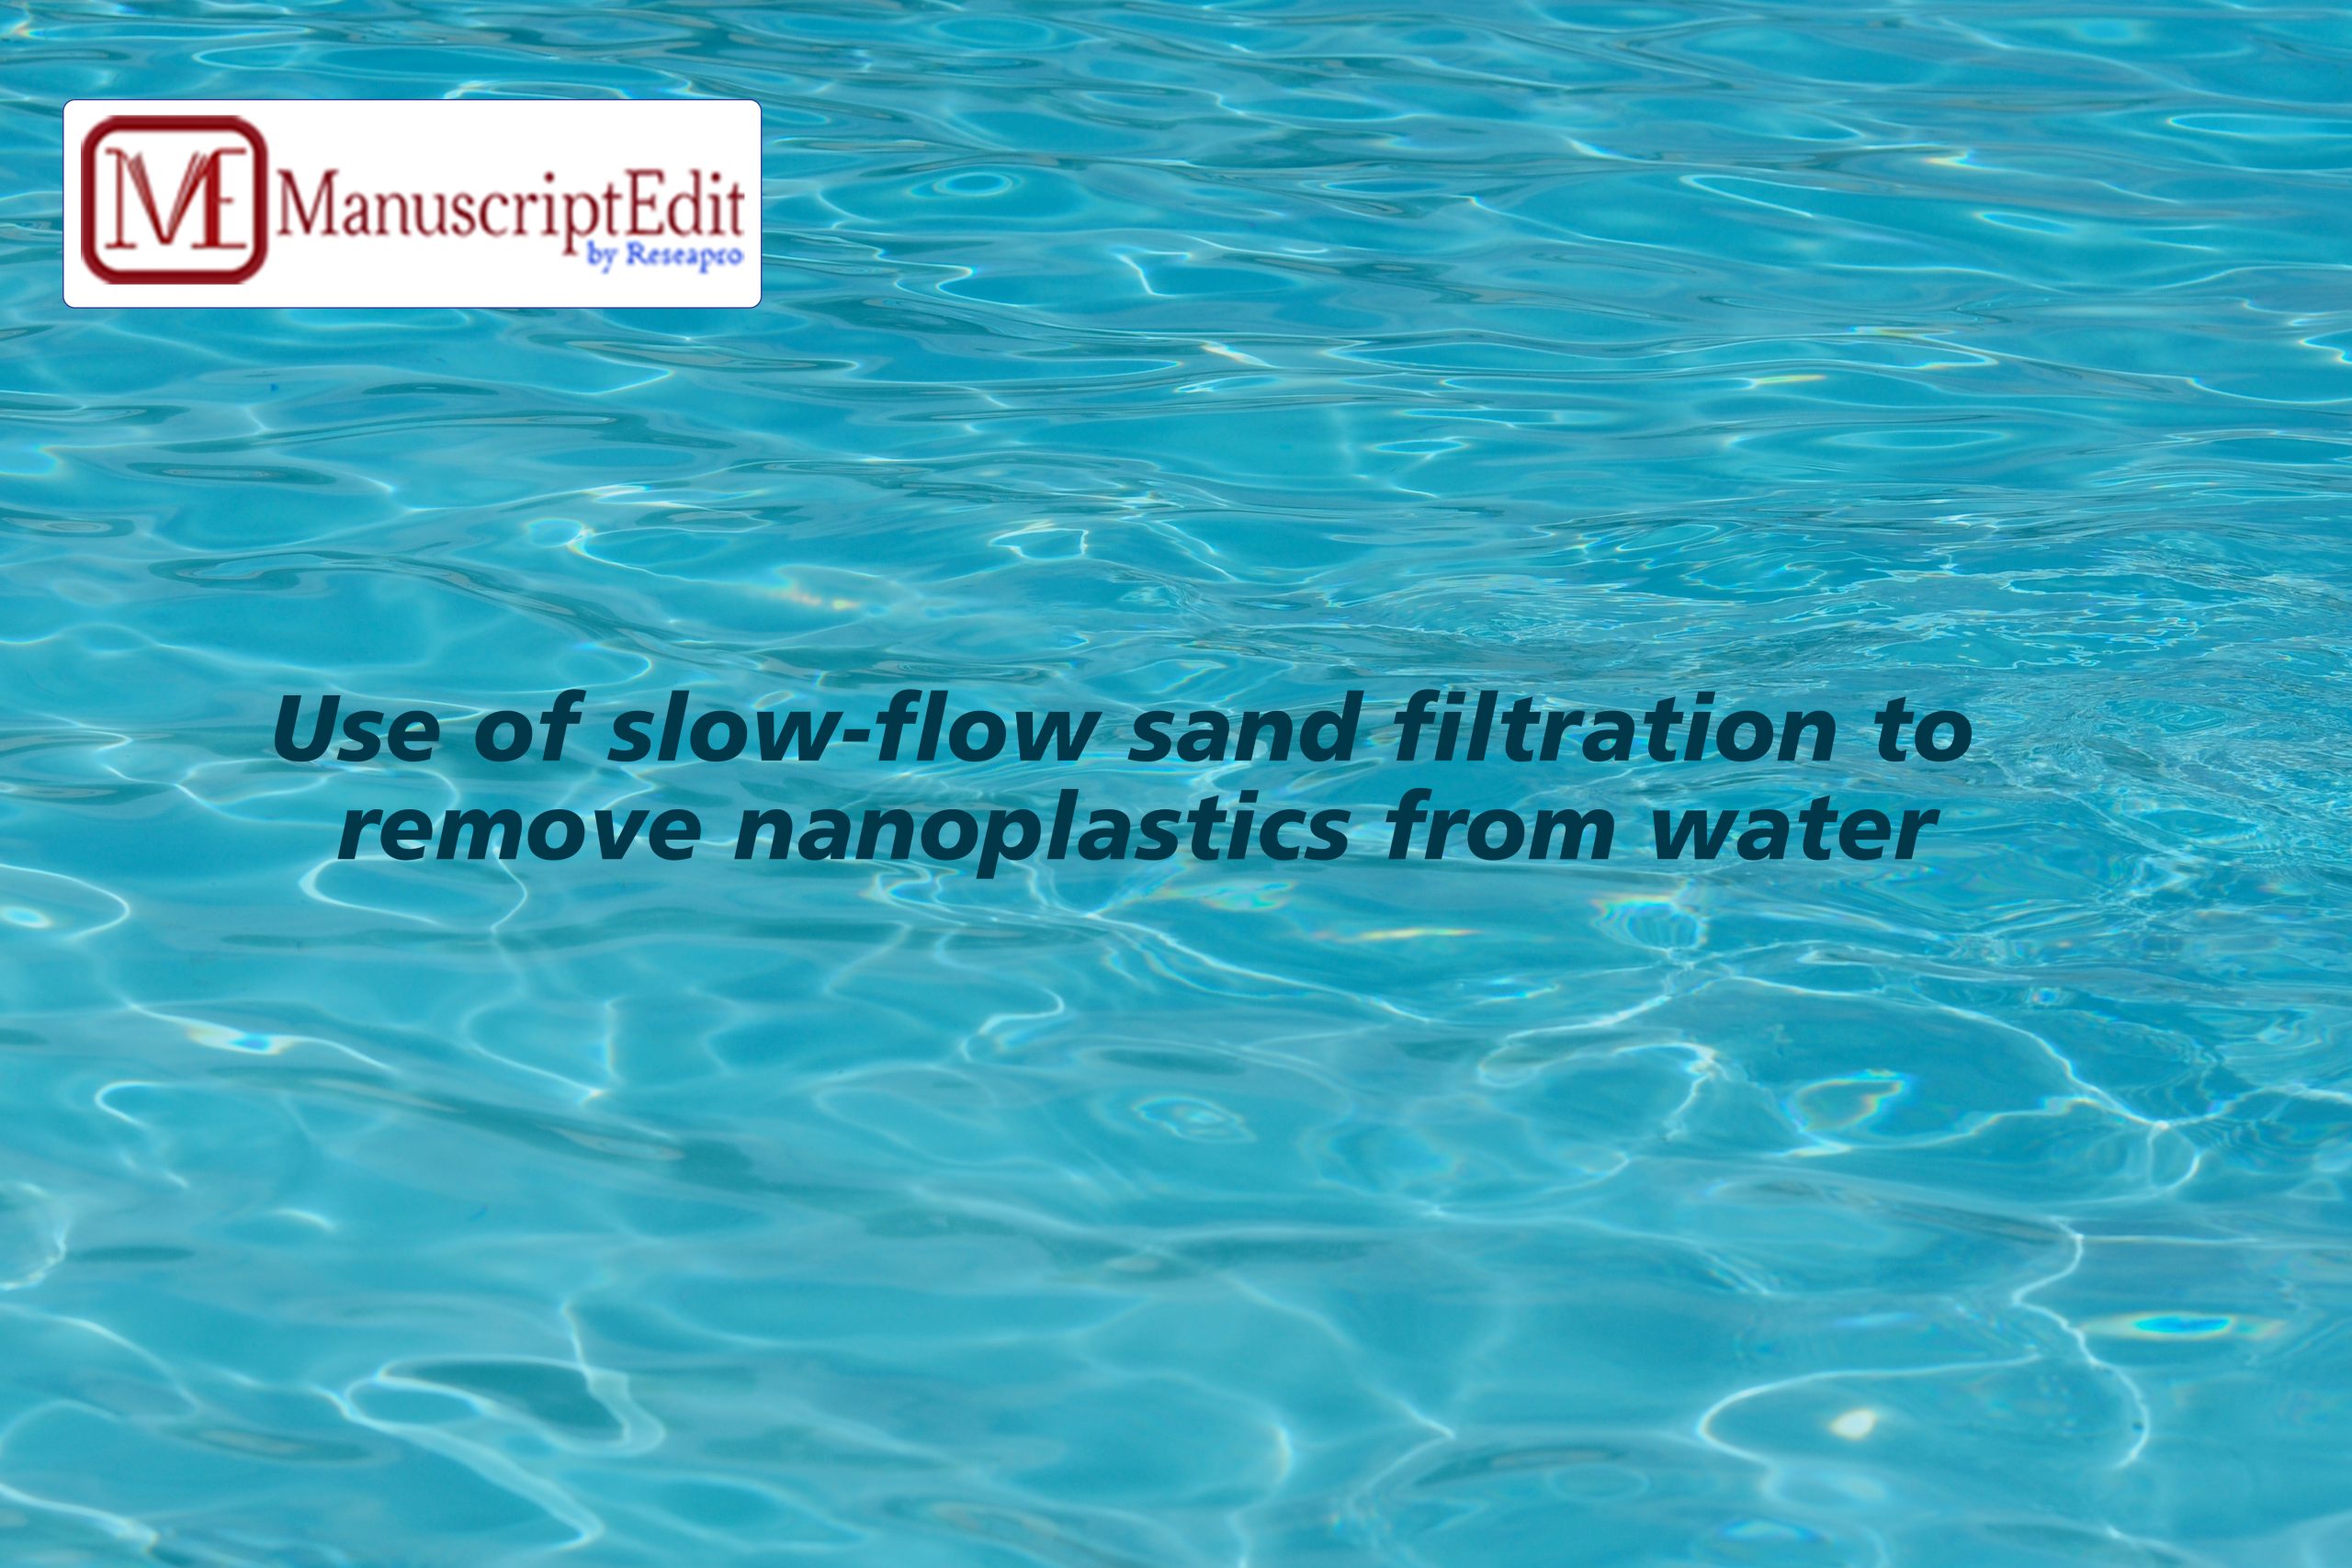 Use of slow-flow sand filtration to remove nanoplastics from water